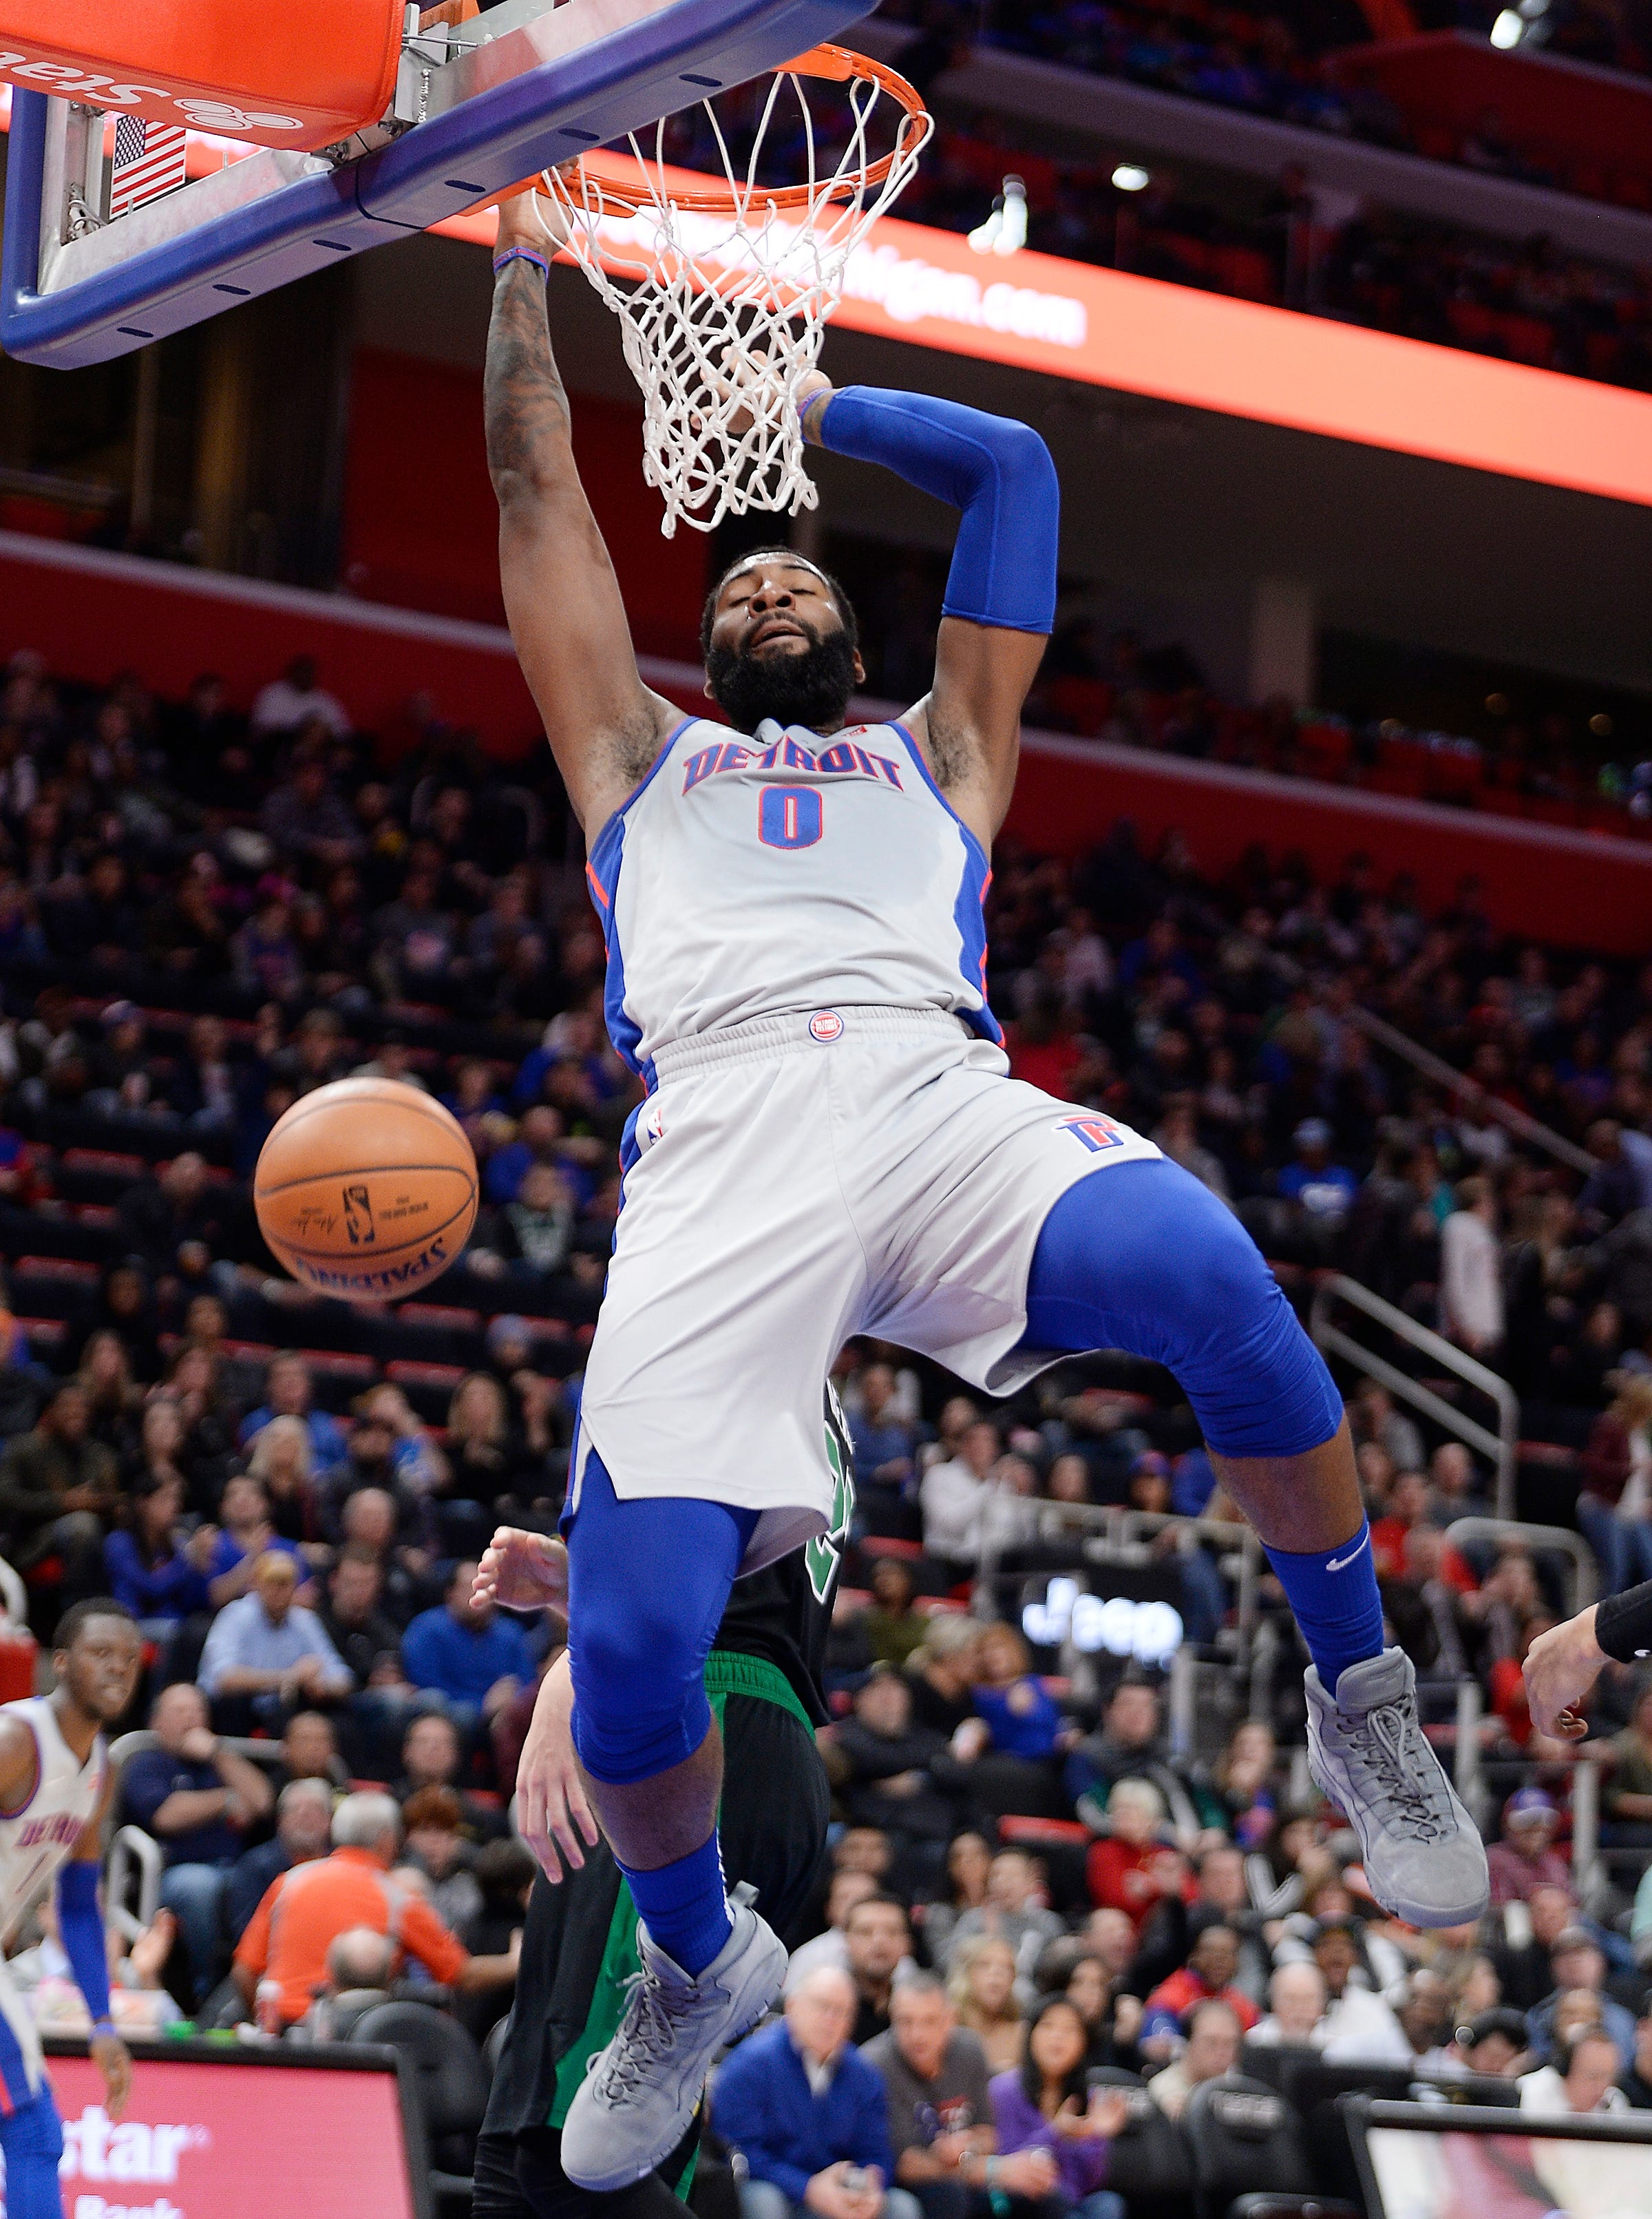 Pistons ' Andre Drummond dunks over Celtics ' Daniel Theis in the third quarter. Drummond had 19 points, 20 rebounds and five block shots.